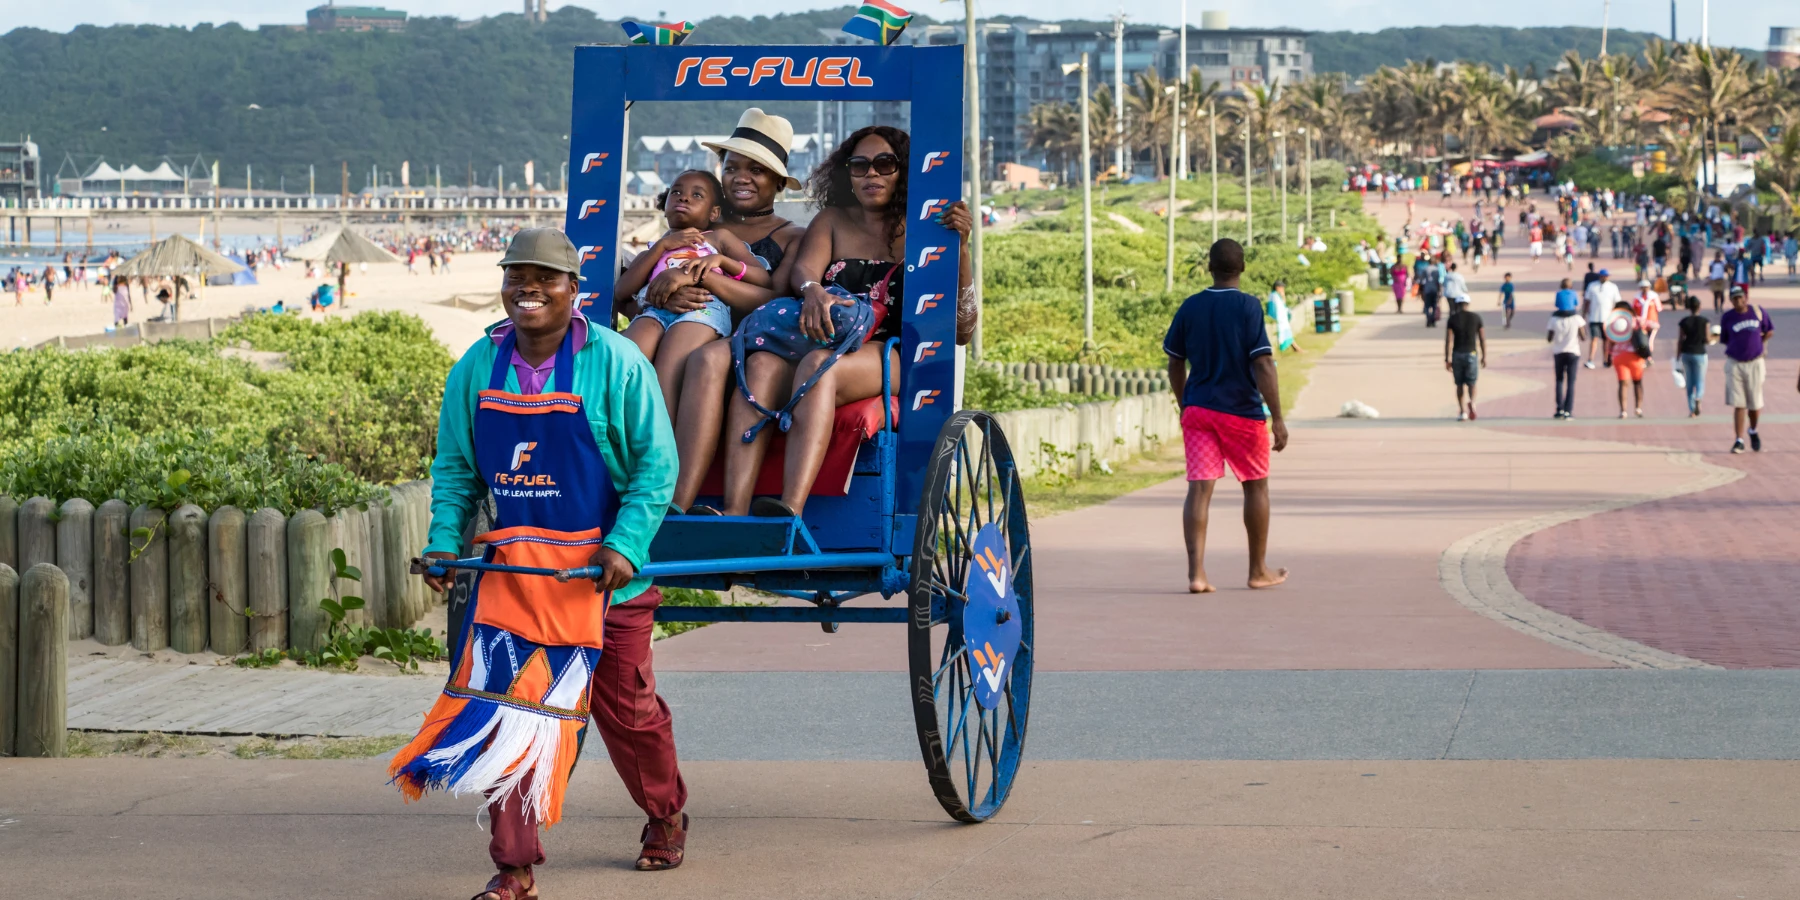 Top 15 Kid-Friendly Things to Do in Durban for the Family